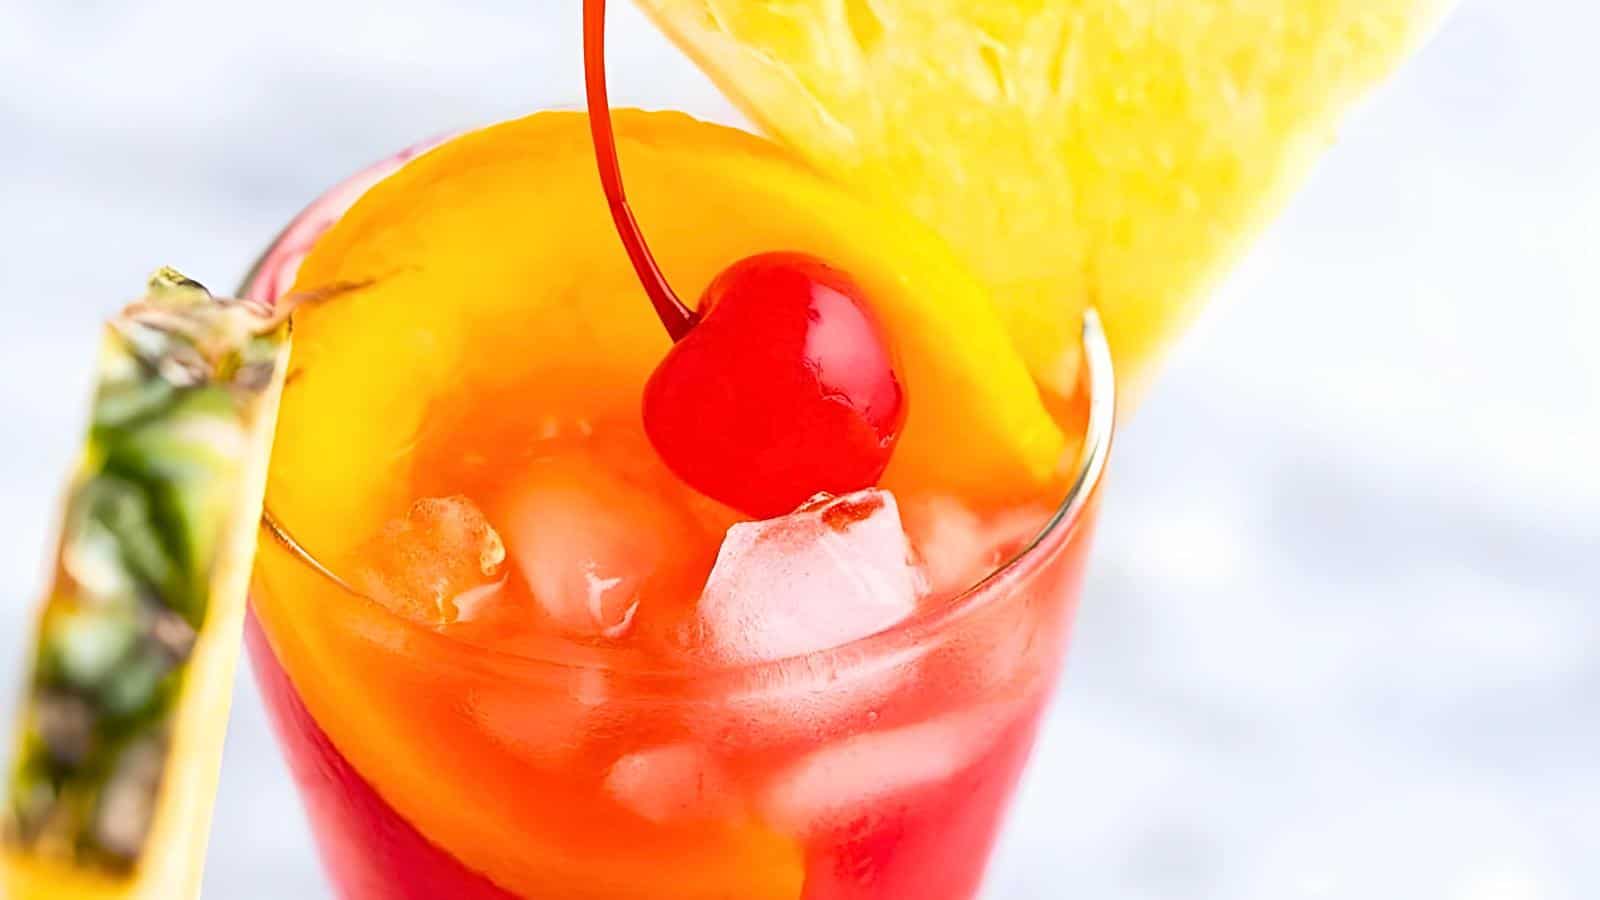 <p>Dive into the classic taste of a Rum Runner. This summer cocktail combines rum, banana liqueur, and blackberry liqueur for a fruity and potent drink. Ideal for poolside sipping!<br><strong>Get the Recipe: </strong><a href="https://www.anediblemosaic.com/rum-runner-cocktail/?utm_source=msn&utm_medium=page&utm_campaign=msn" rel="noopener">The Original Rum Runner Cocktail Recipe</a></p>